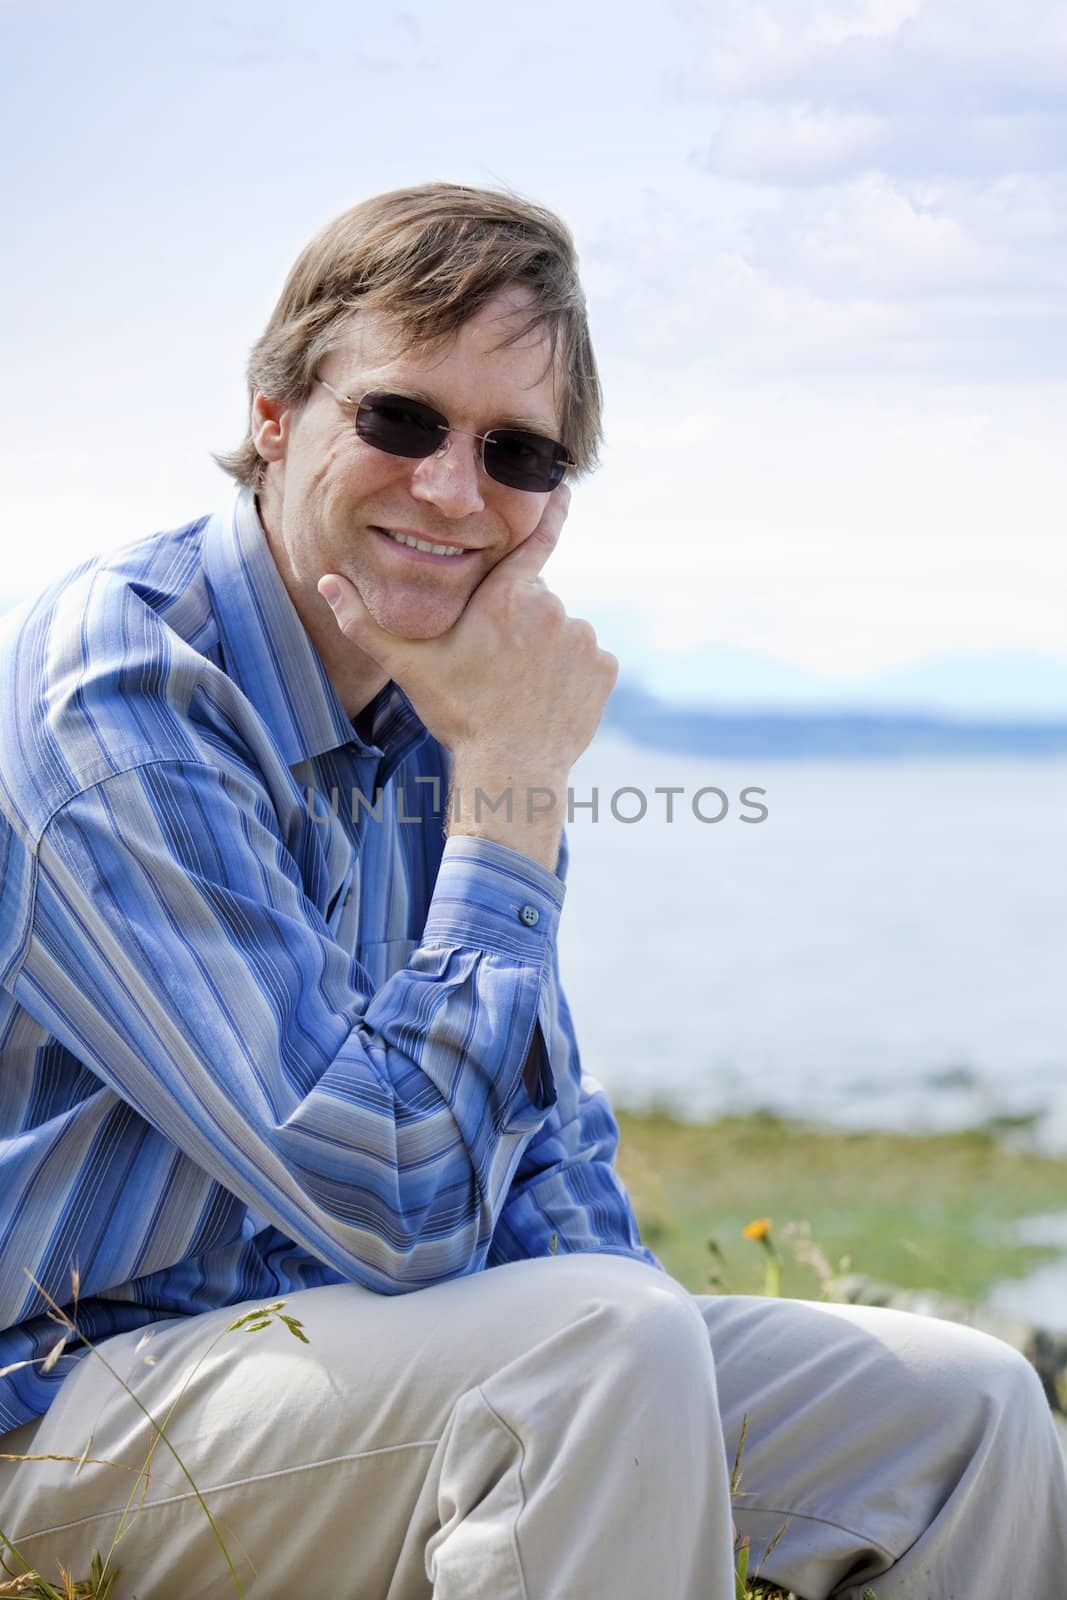 Handsome Causcasian man in forties relaxing by lake side by jarenwicklund